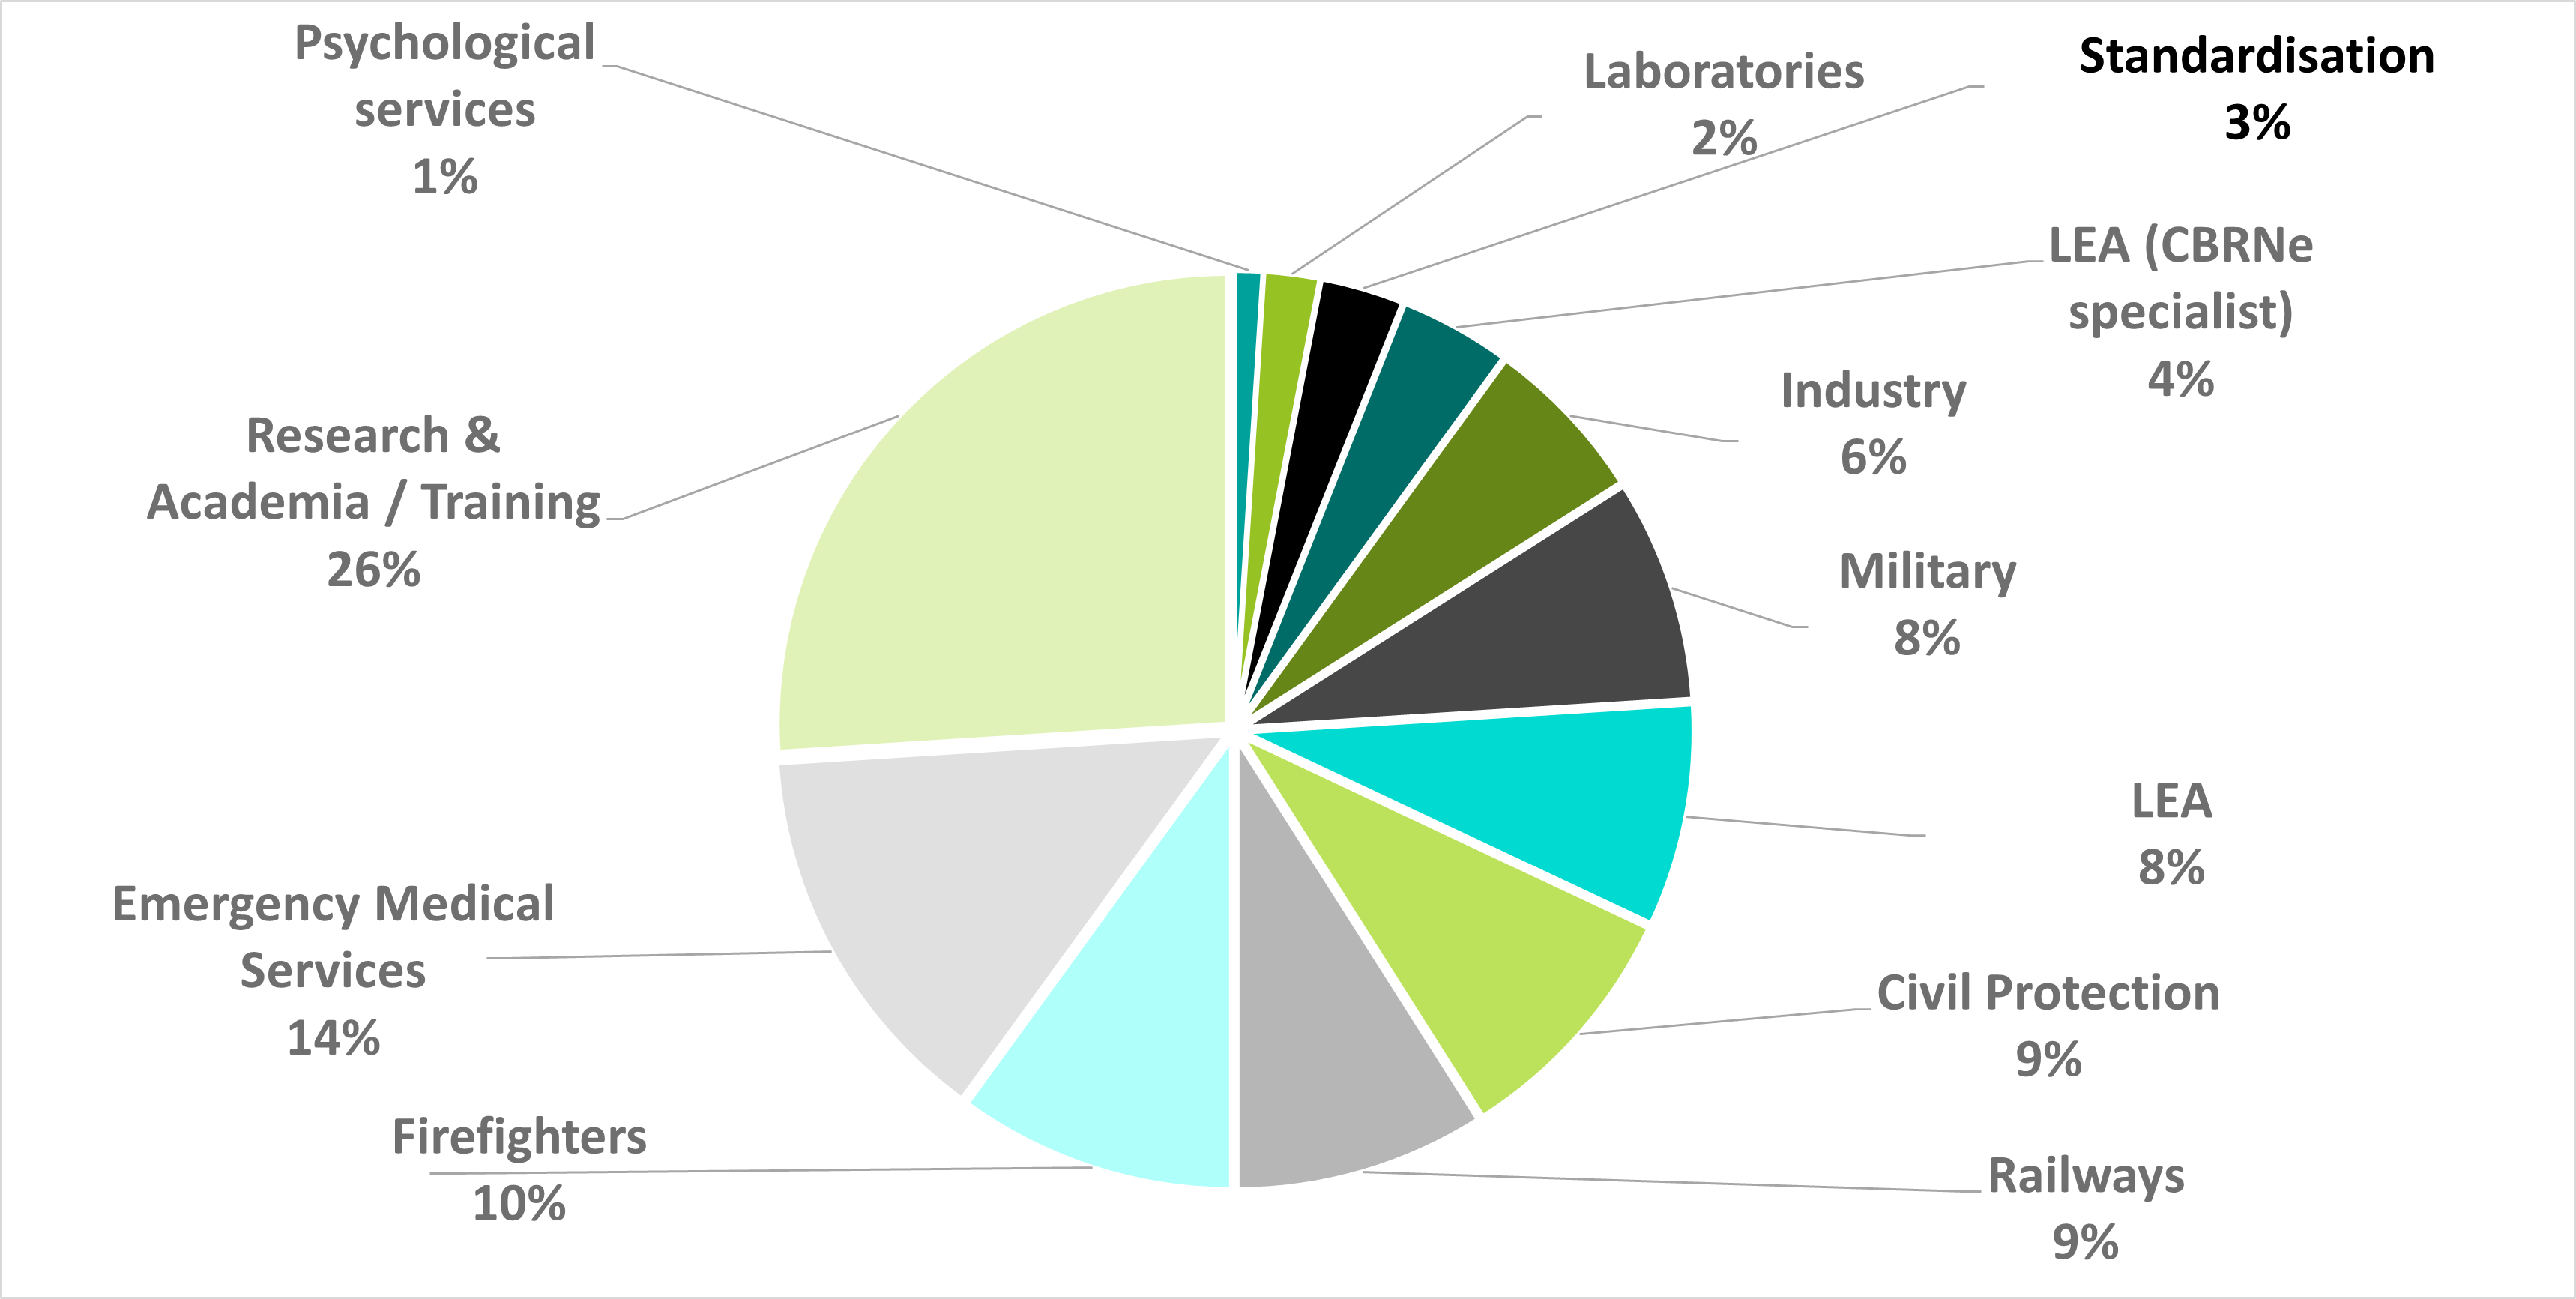 Pie charts illustrating composition of PSAB members of PROACTIVE. Standardisation which is highlighted in black represents of 3 percent, LEA (CBRNe specialist) represents 4 percent. Industry is 6 percent. Military and LEA represent 8 percent. Civil Protection and Railways represent 9 per cent. Firefighters represent 10 percent. Emergency Medical Services represent 14 percent. Researcg & Academia/training represent 26 percent. Pyschological services represent 1 percent.